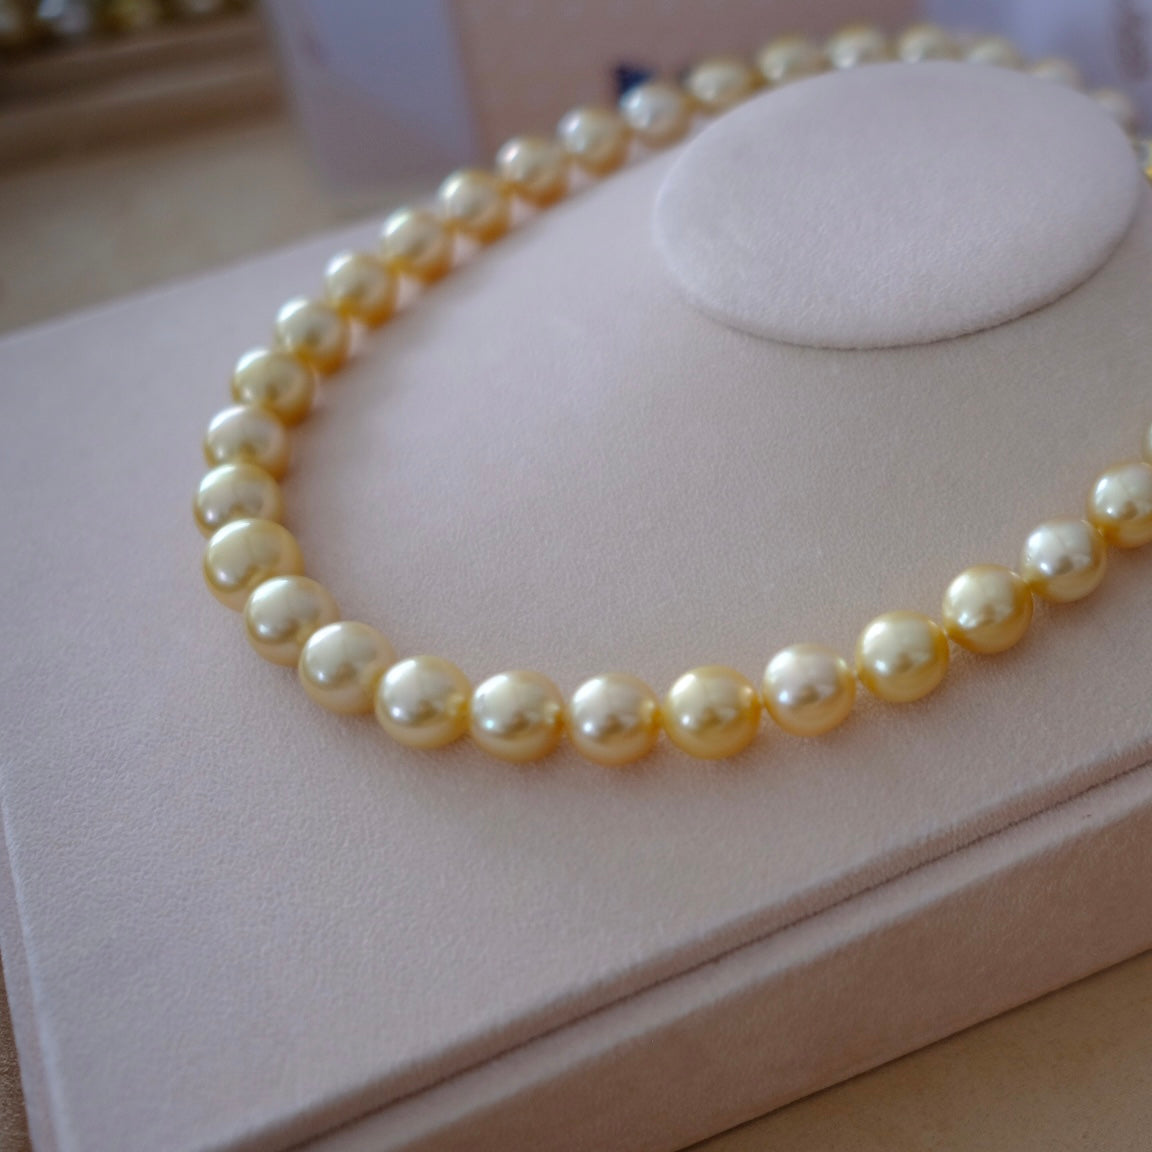 Golden South Sea Pearl Necklace, 10-12.9mm, GUILD Certificate